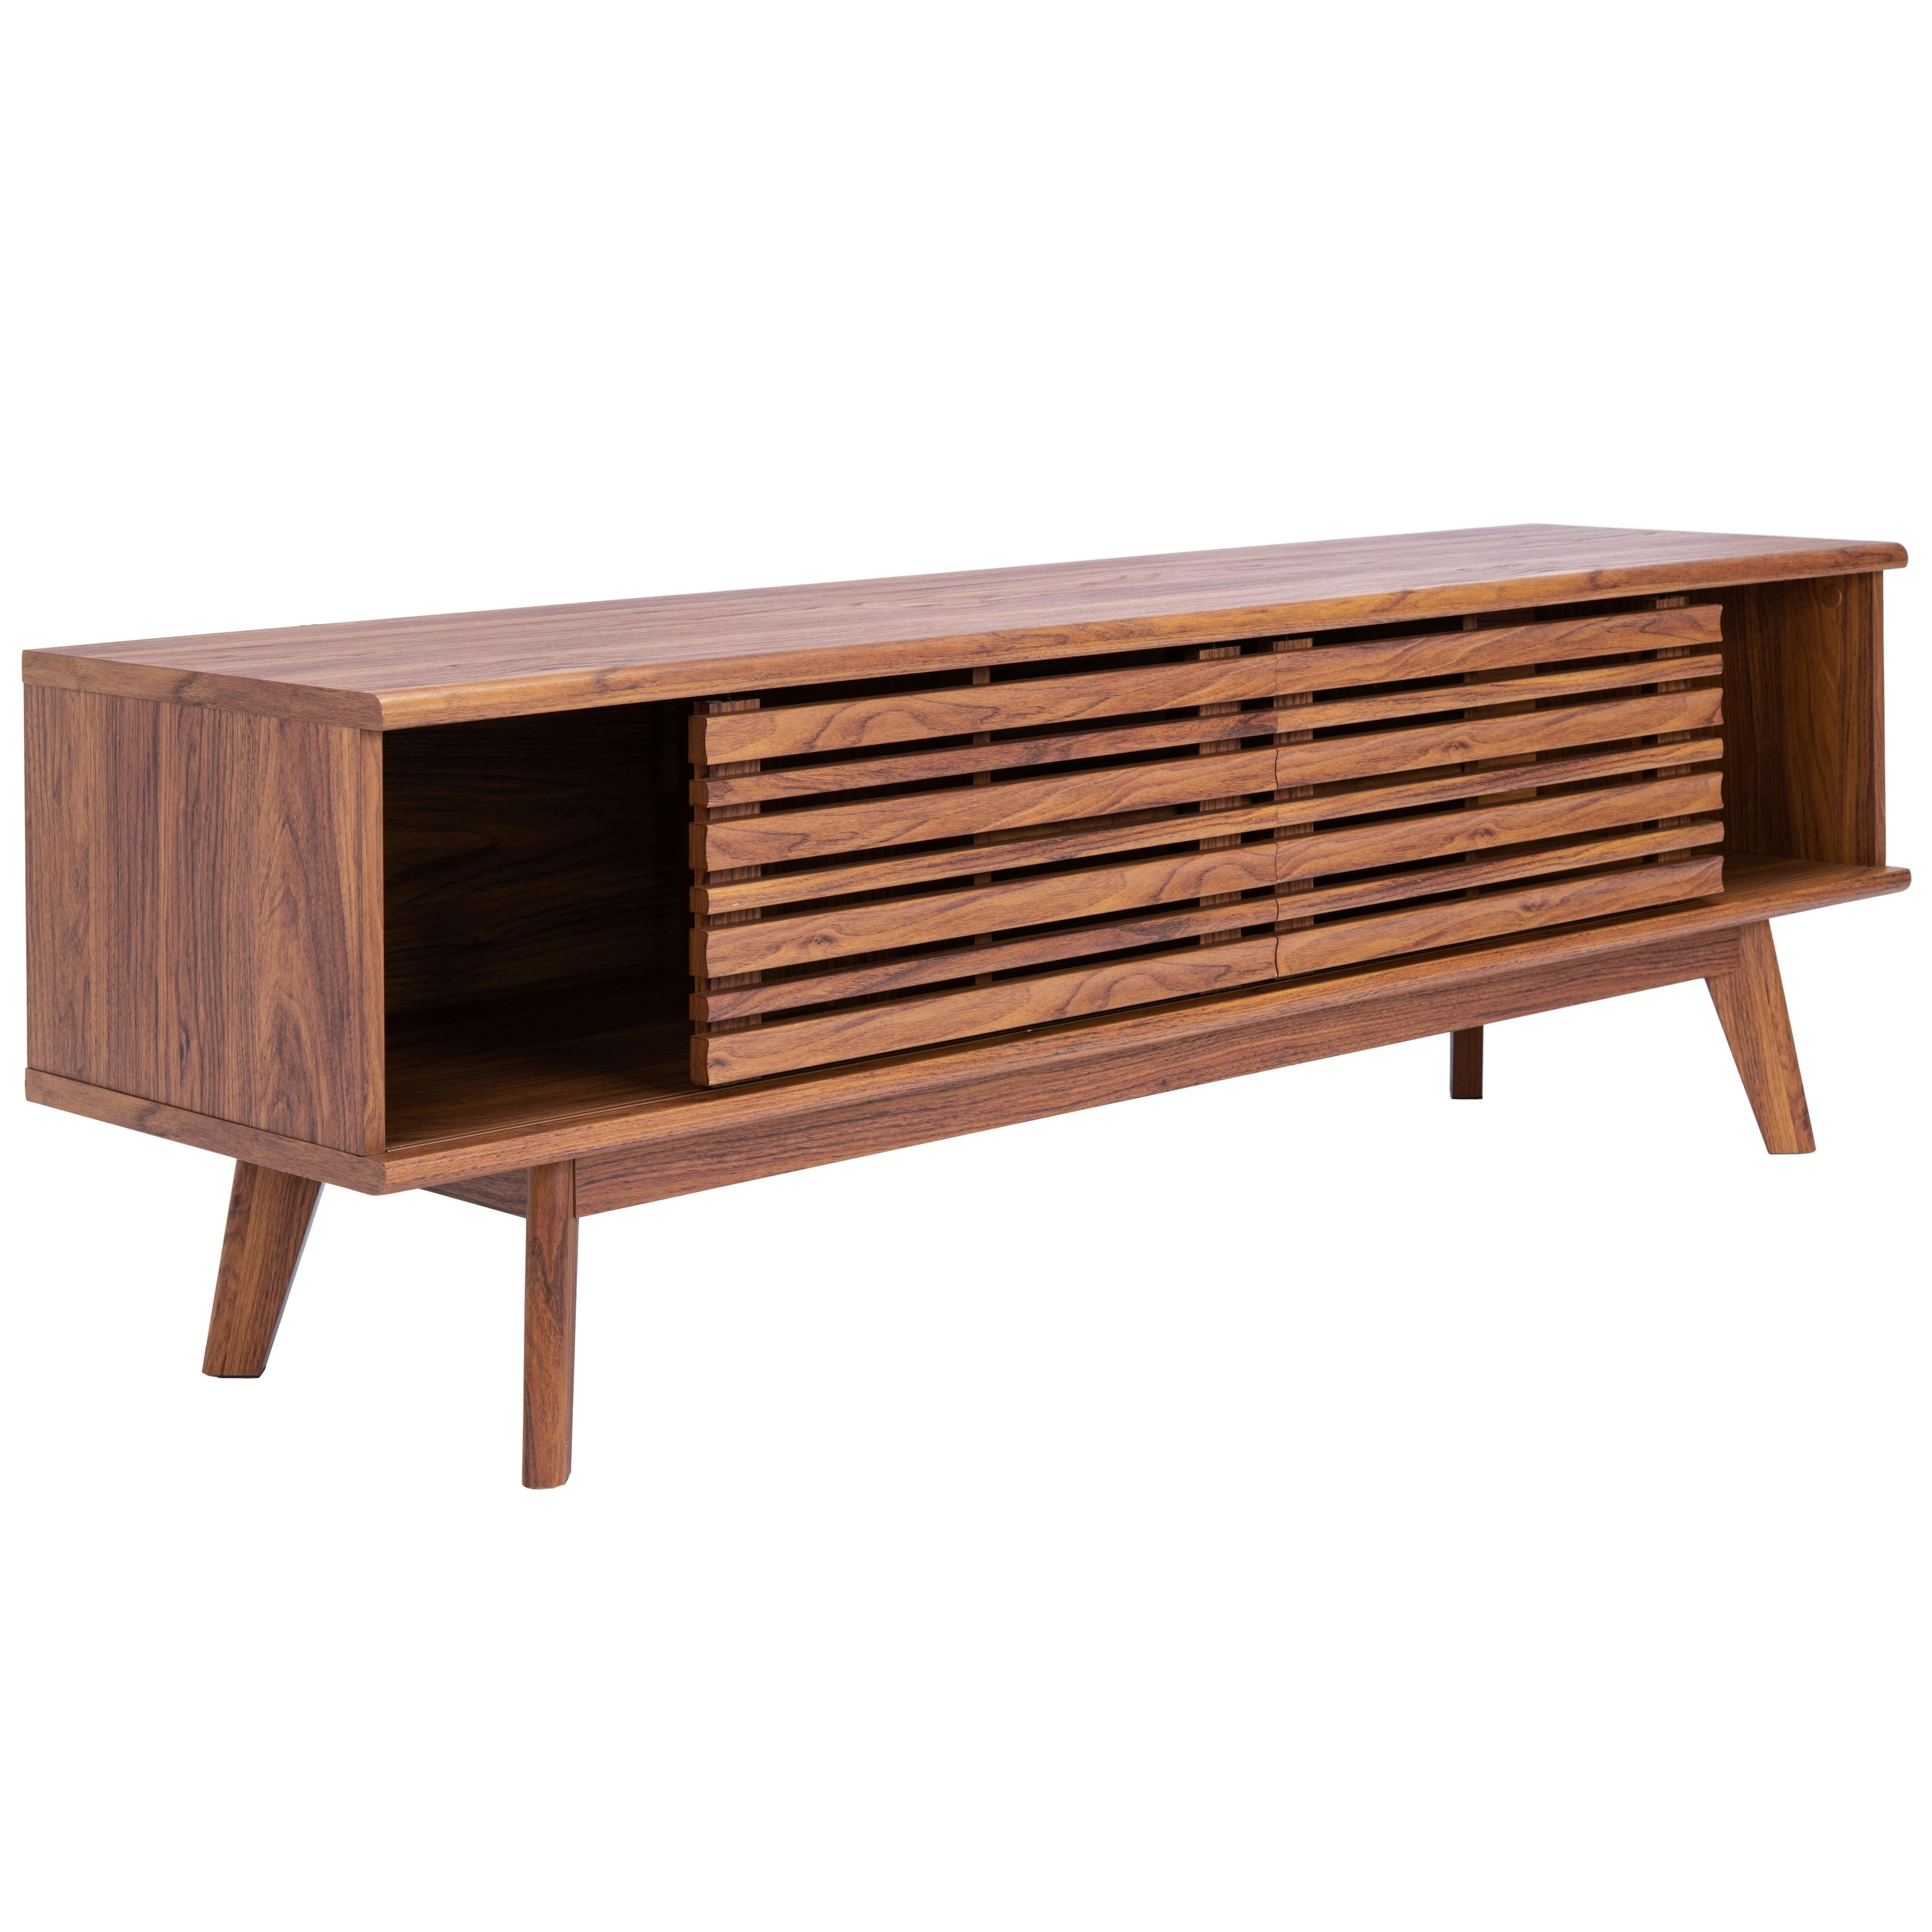 Retro Chic Walnut Media Stand with Splayed Legs and Slatted Doors